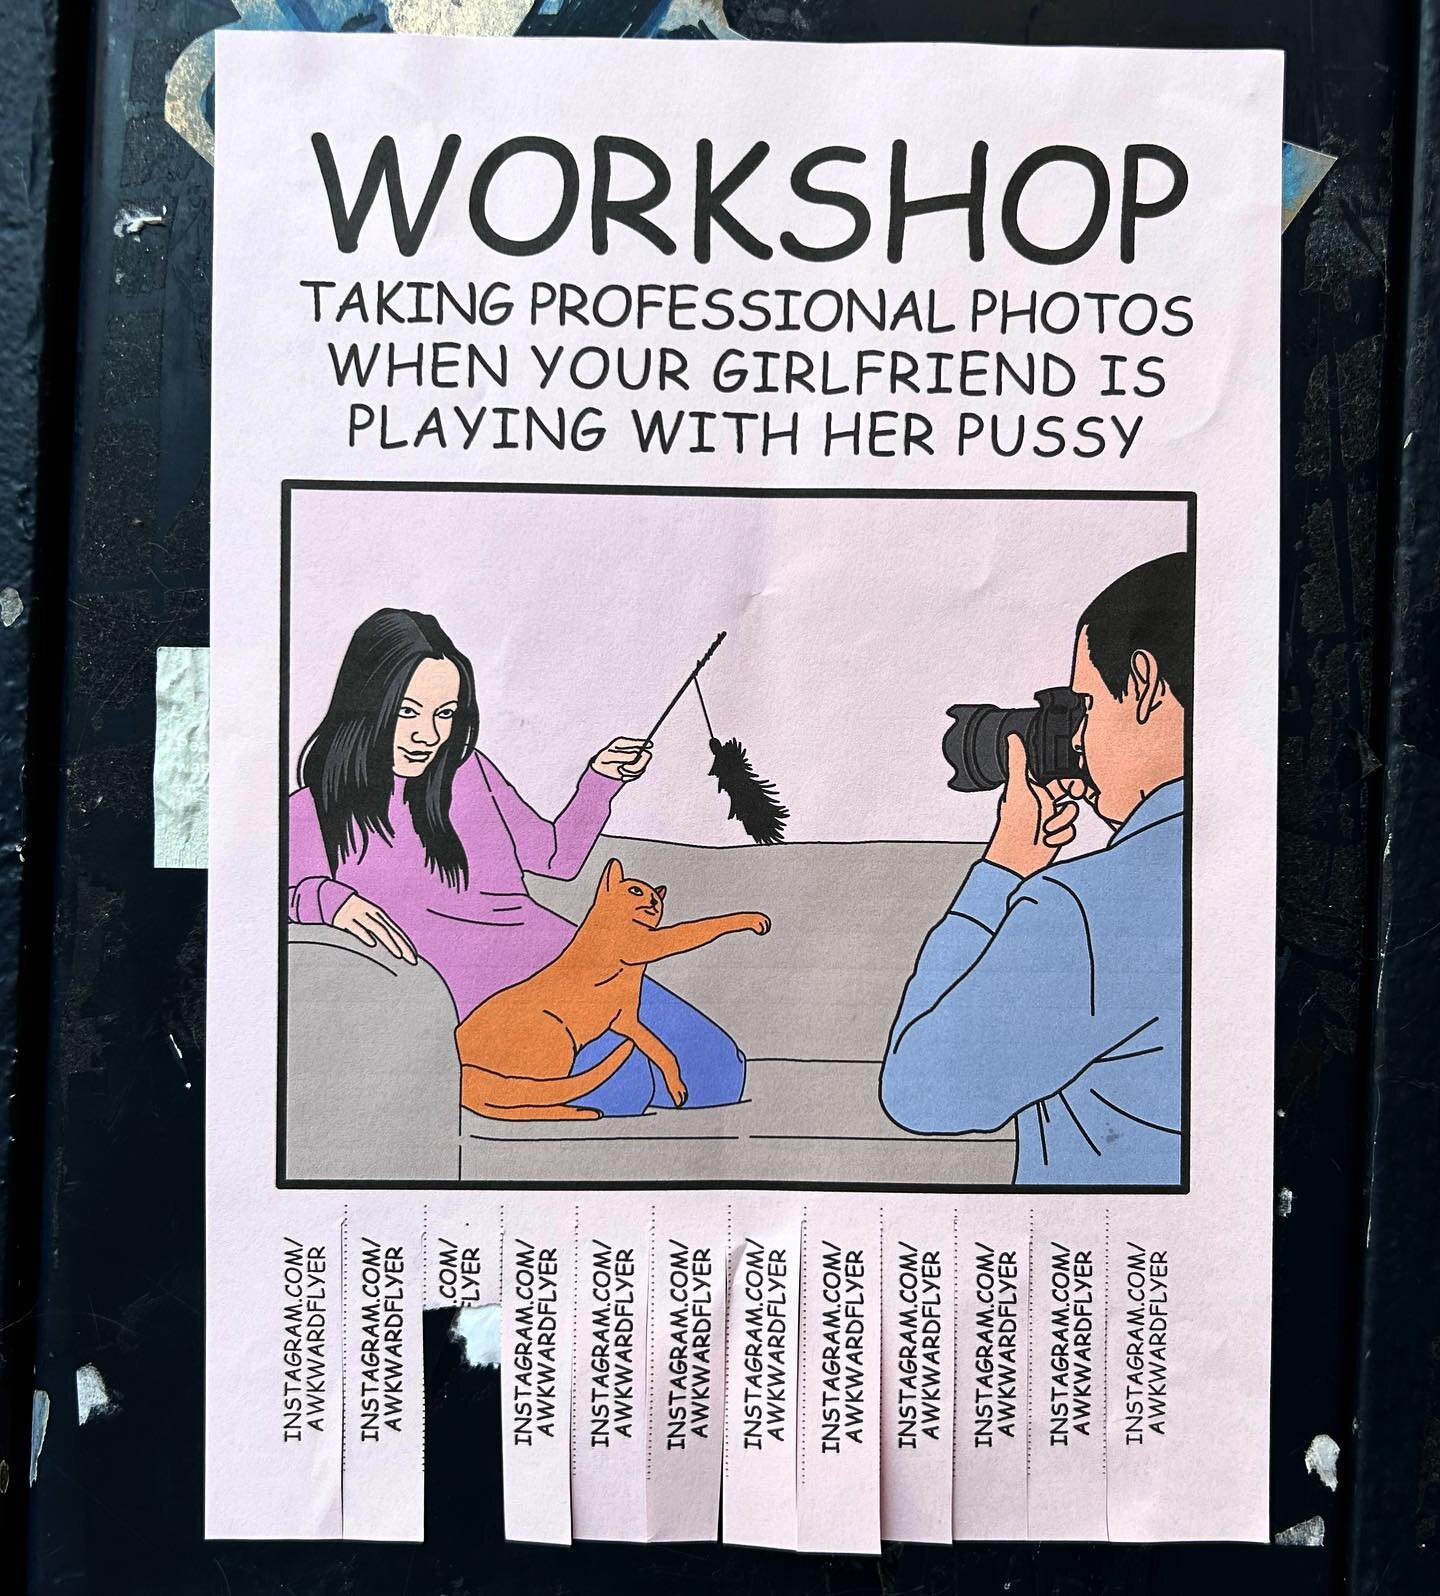 Taking professional photos when she is playing with her pussy....... #awkwardflyer #awkward #flyer #street #steetart #art #workshop #drawing #funny #haha #hilarious #joke #hahahaha #howto #diy